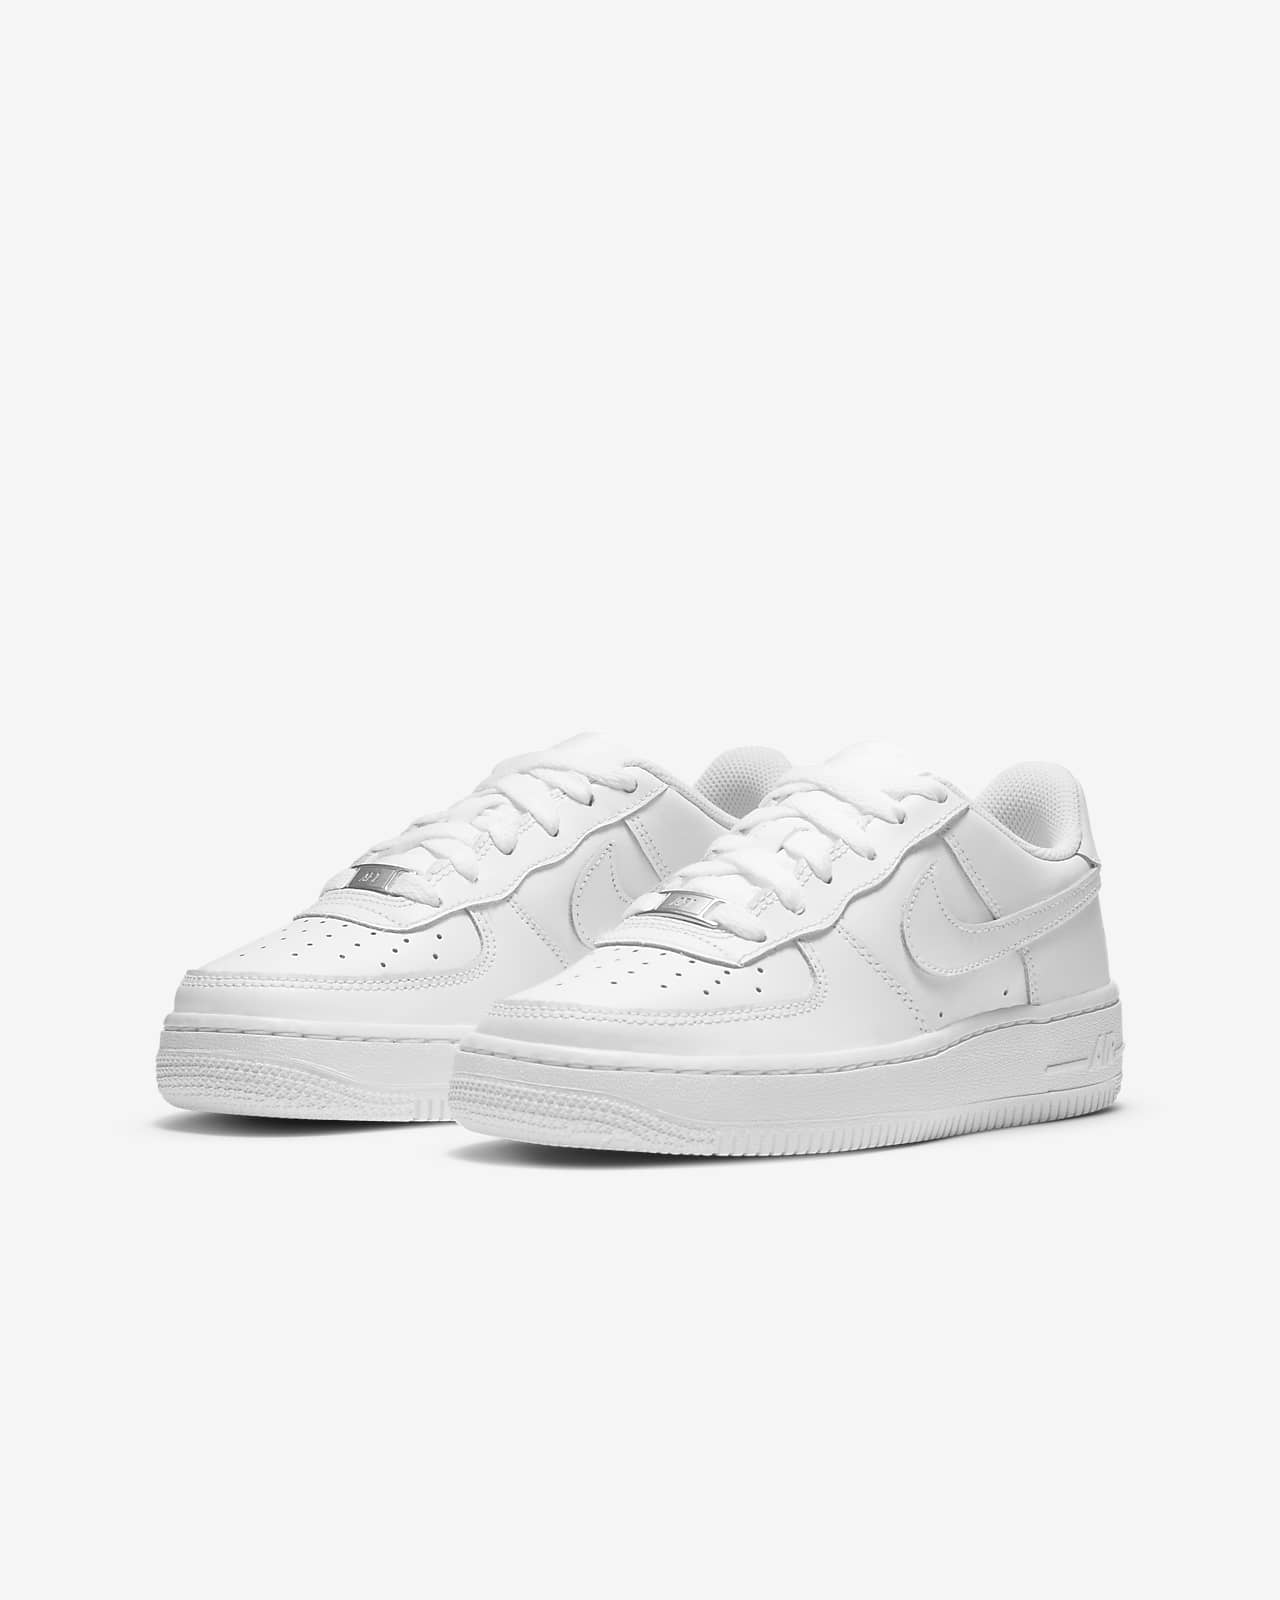 nike force one mid